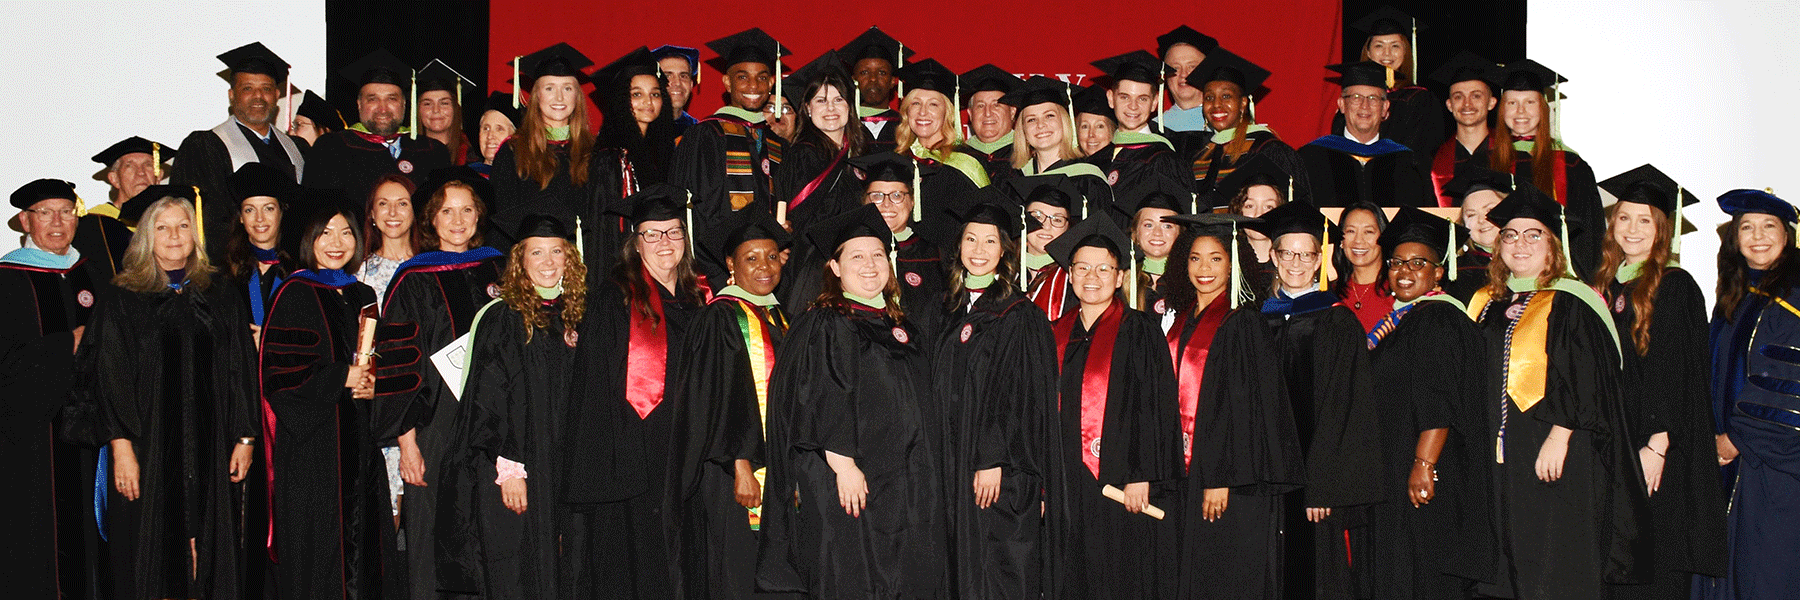 Group of graduates posing for photo in Commencement caps and gowns